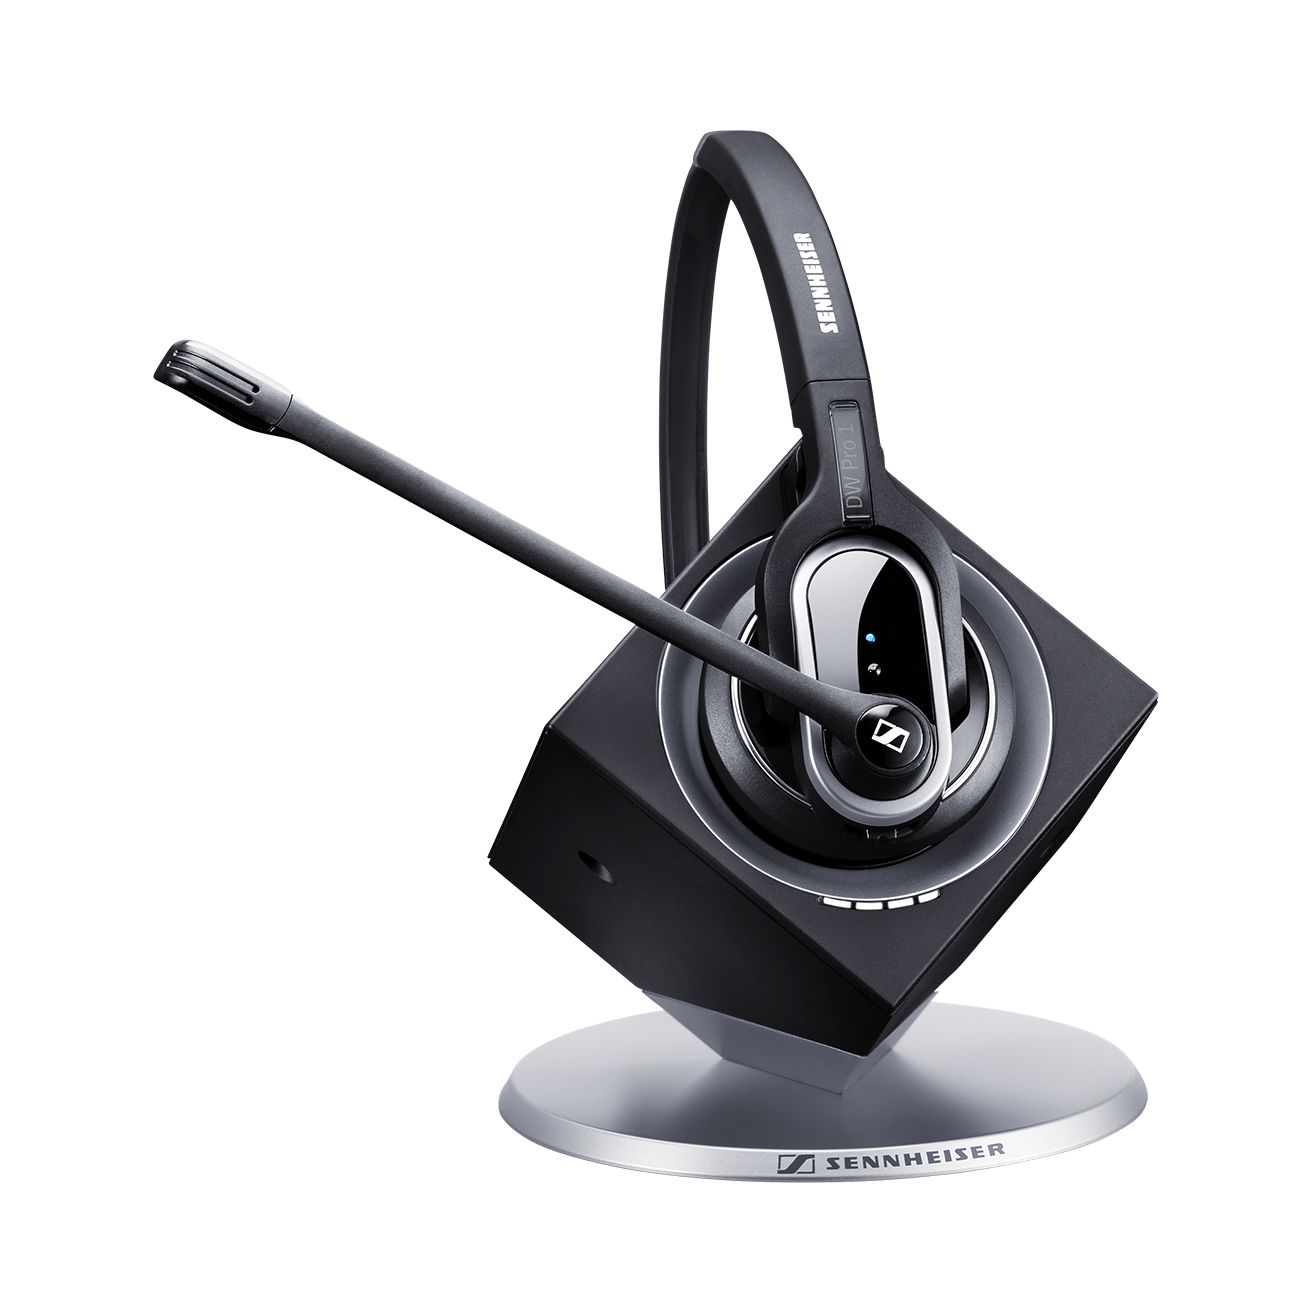 DW 20 USB - UK DECT Wireless Monaural Professional headset with base station, only for PC, adjustable mic arm + ultra NC Mic.